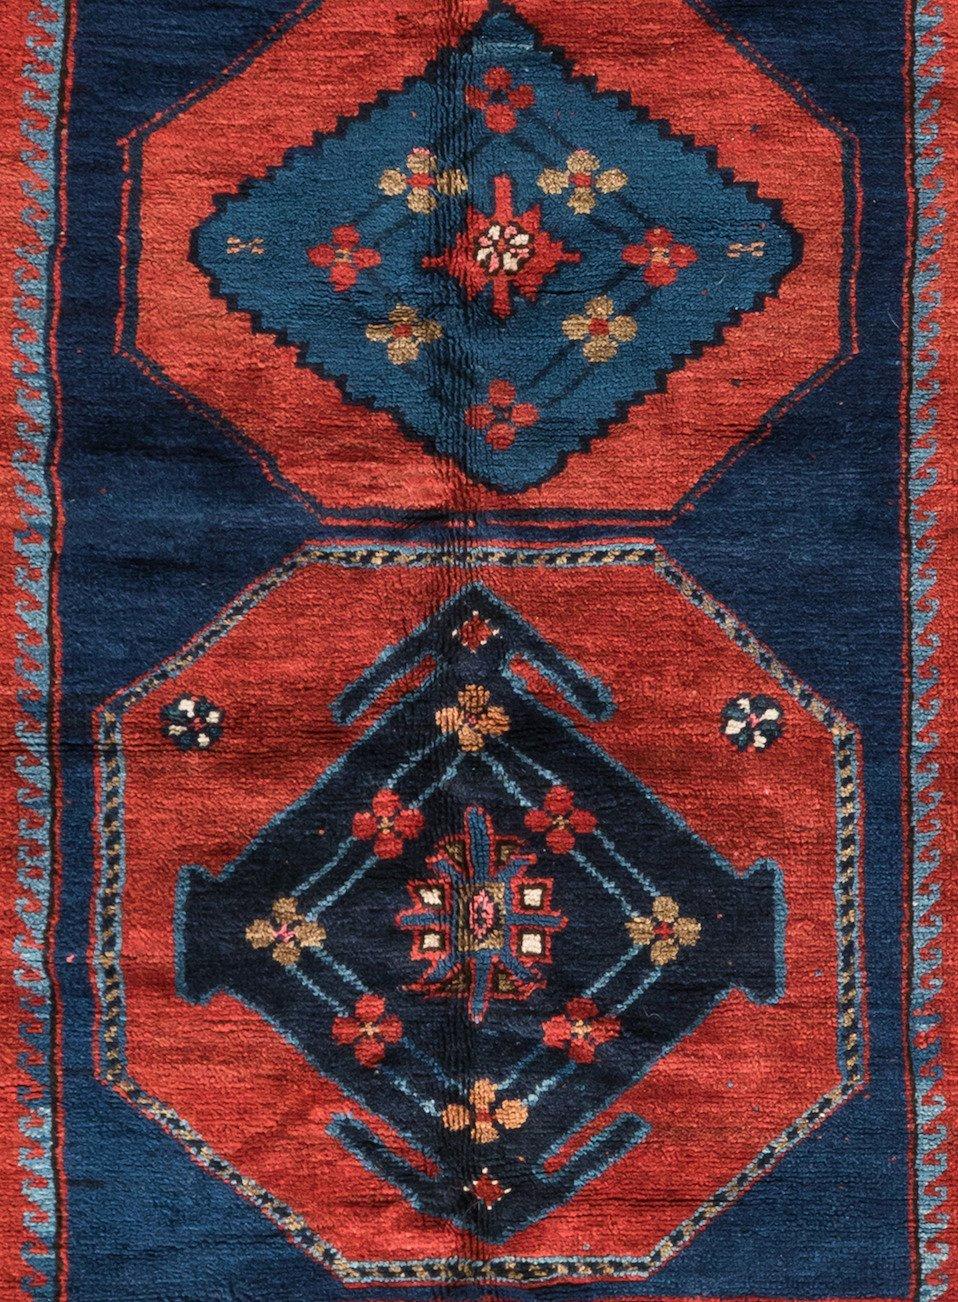 Hand-Woven Antique Red and Blue Caucasian Tribal Kazak Rug, circa 1930s For Sale